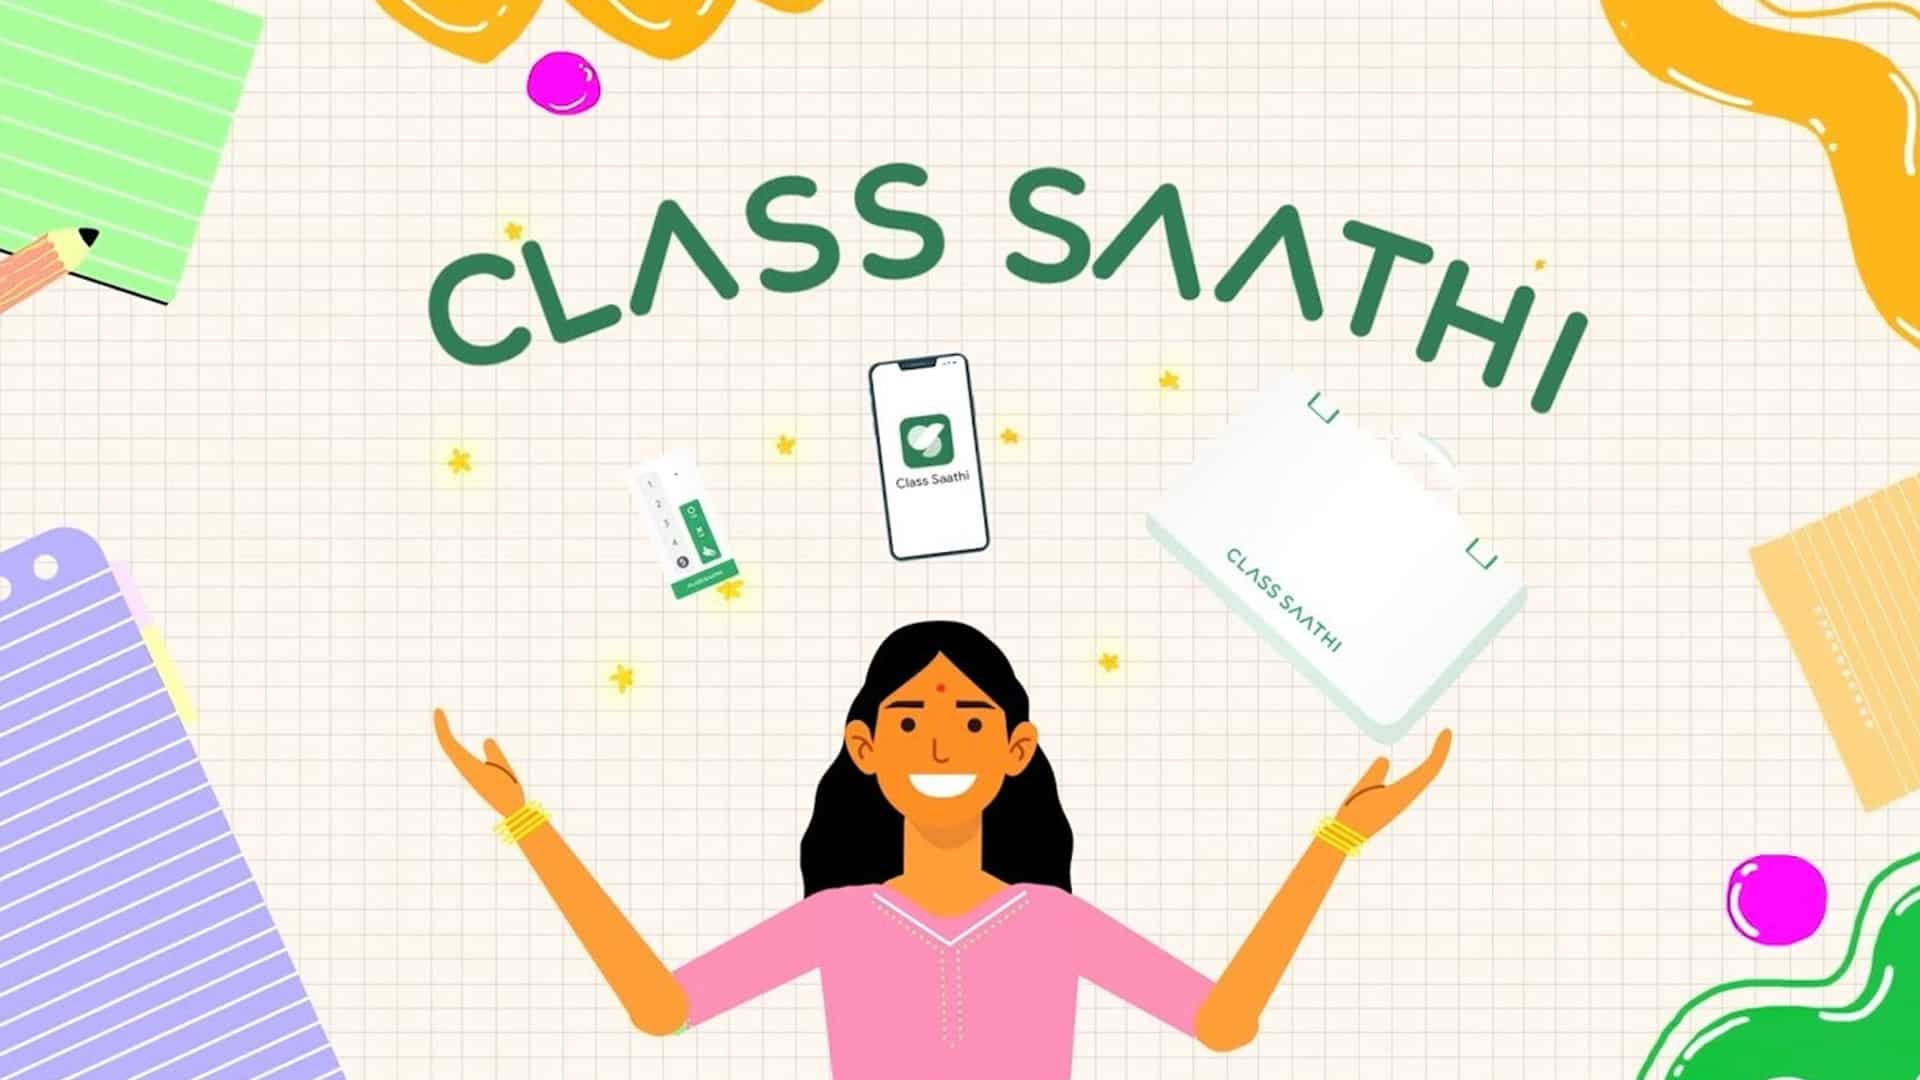 Samsung Backed Ed-tech Firm TagHive's Class Saathi App Set to Record 300 percent Y-O-Y Growth